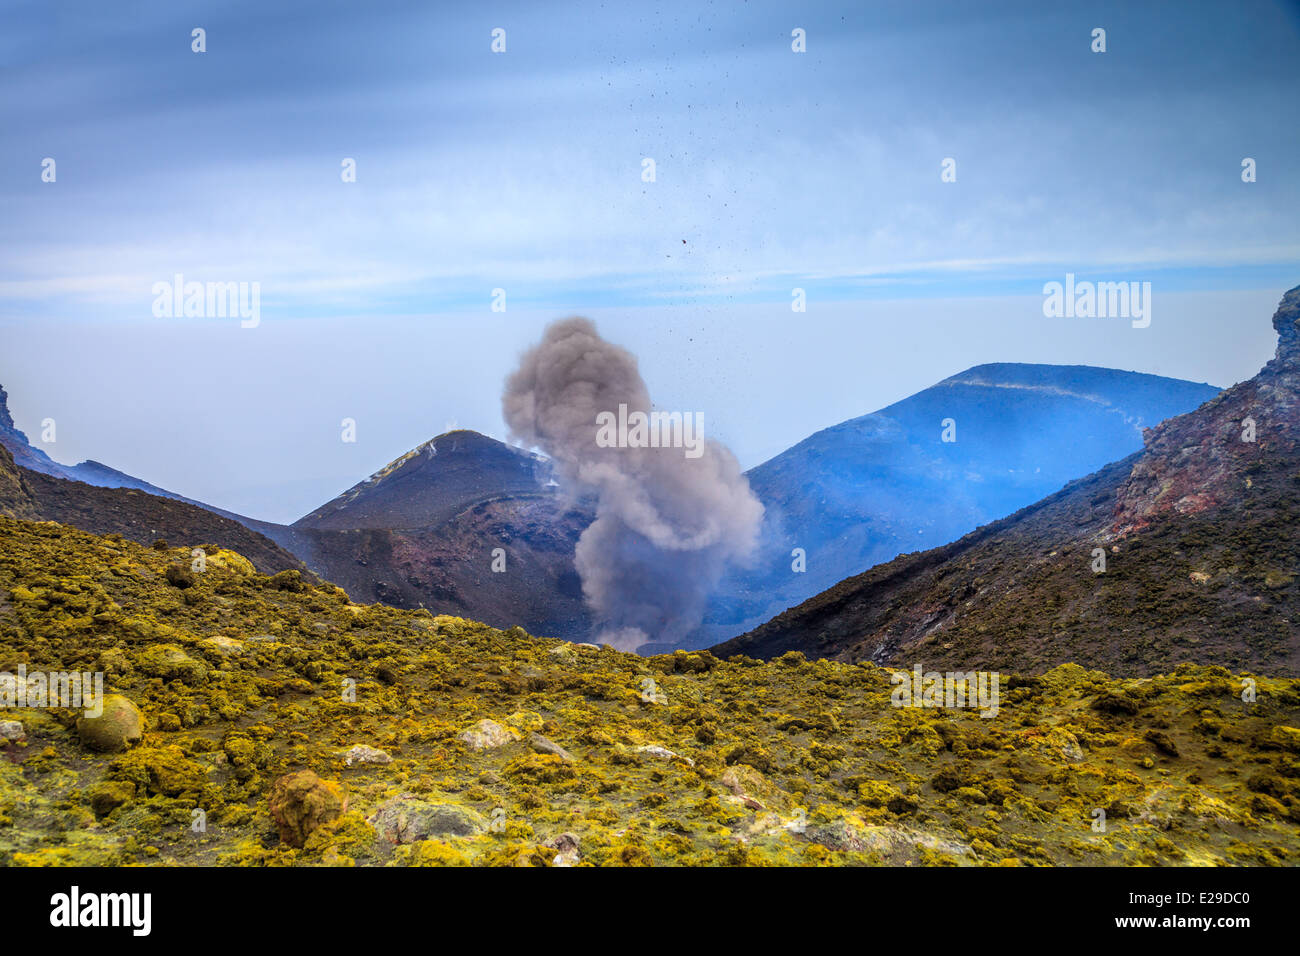 Explosion in summit mouth of mount Etna (Catania, Italy) Stock Photo